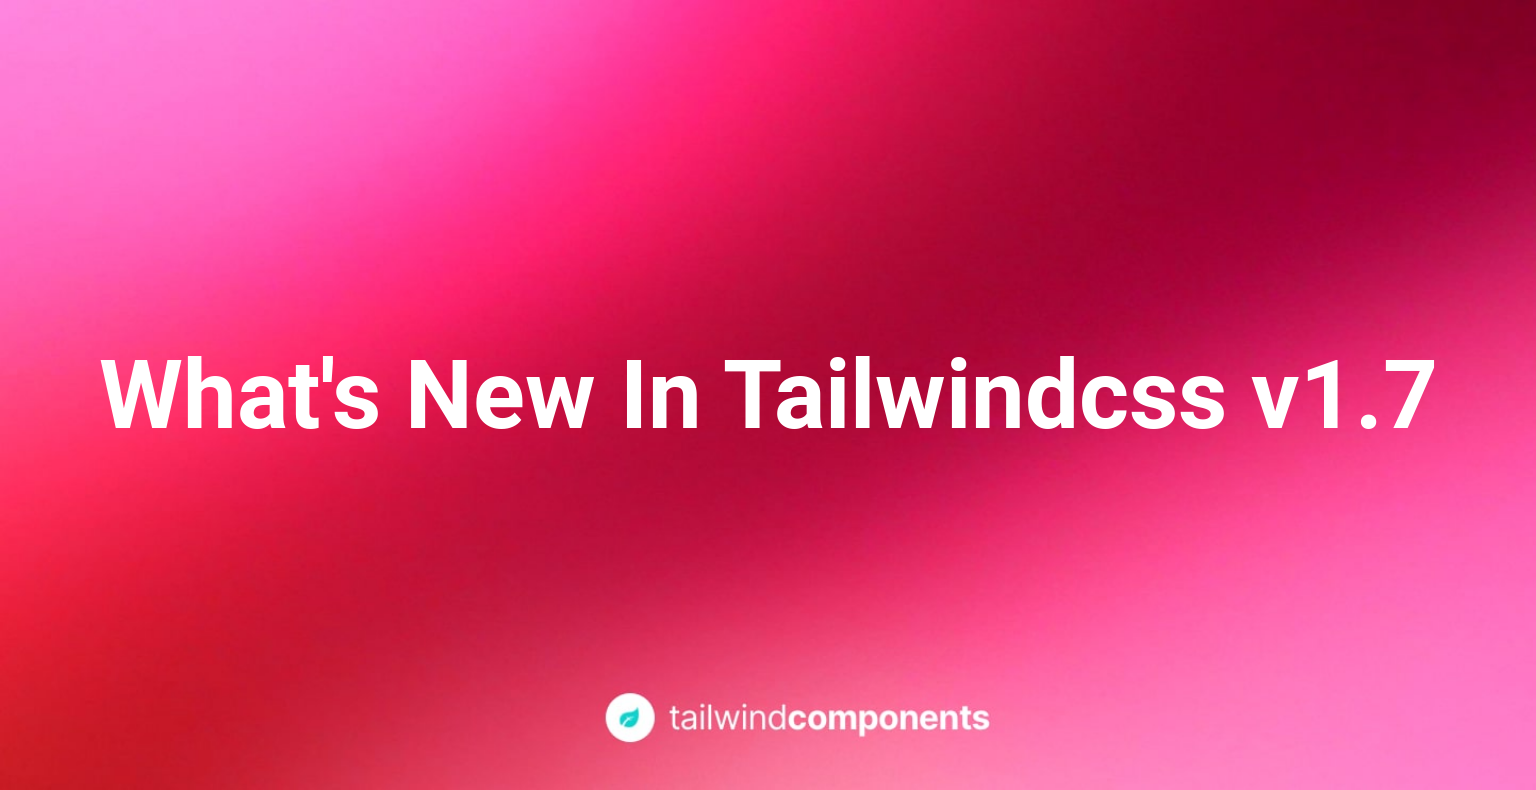 What's New In Tailwindcss v1.7 Image